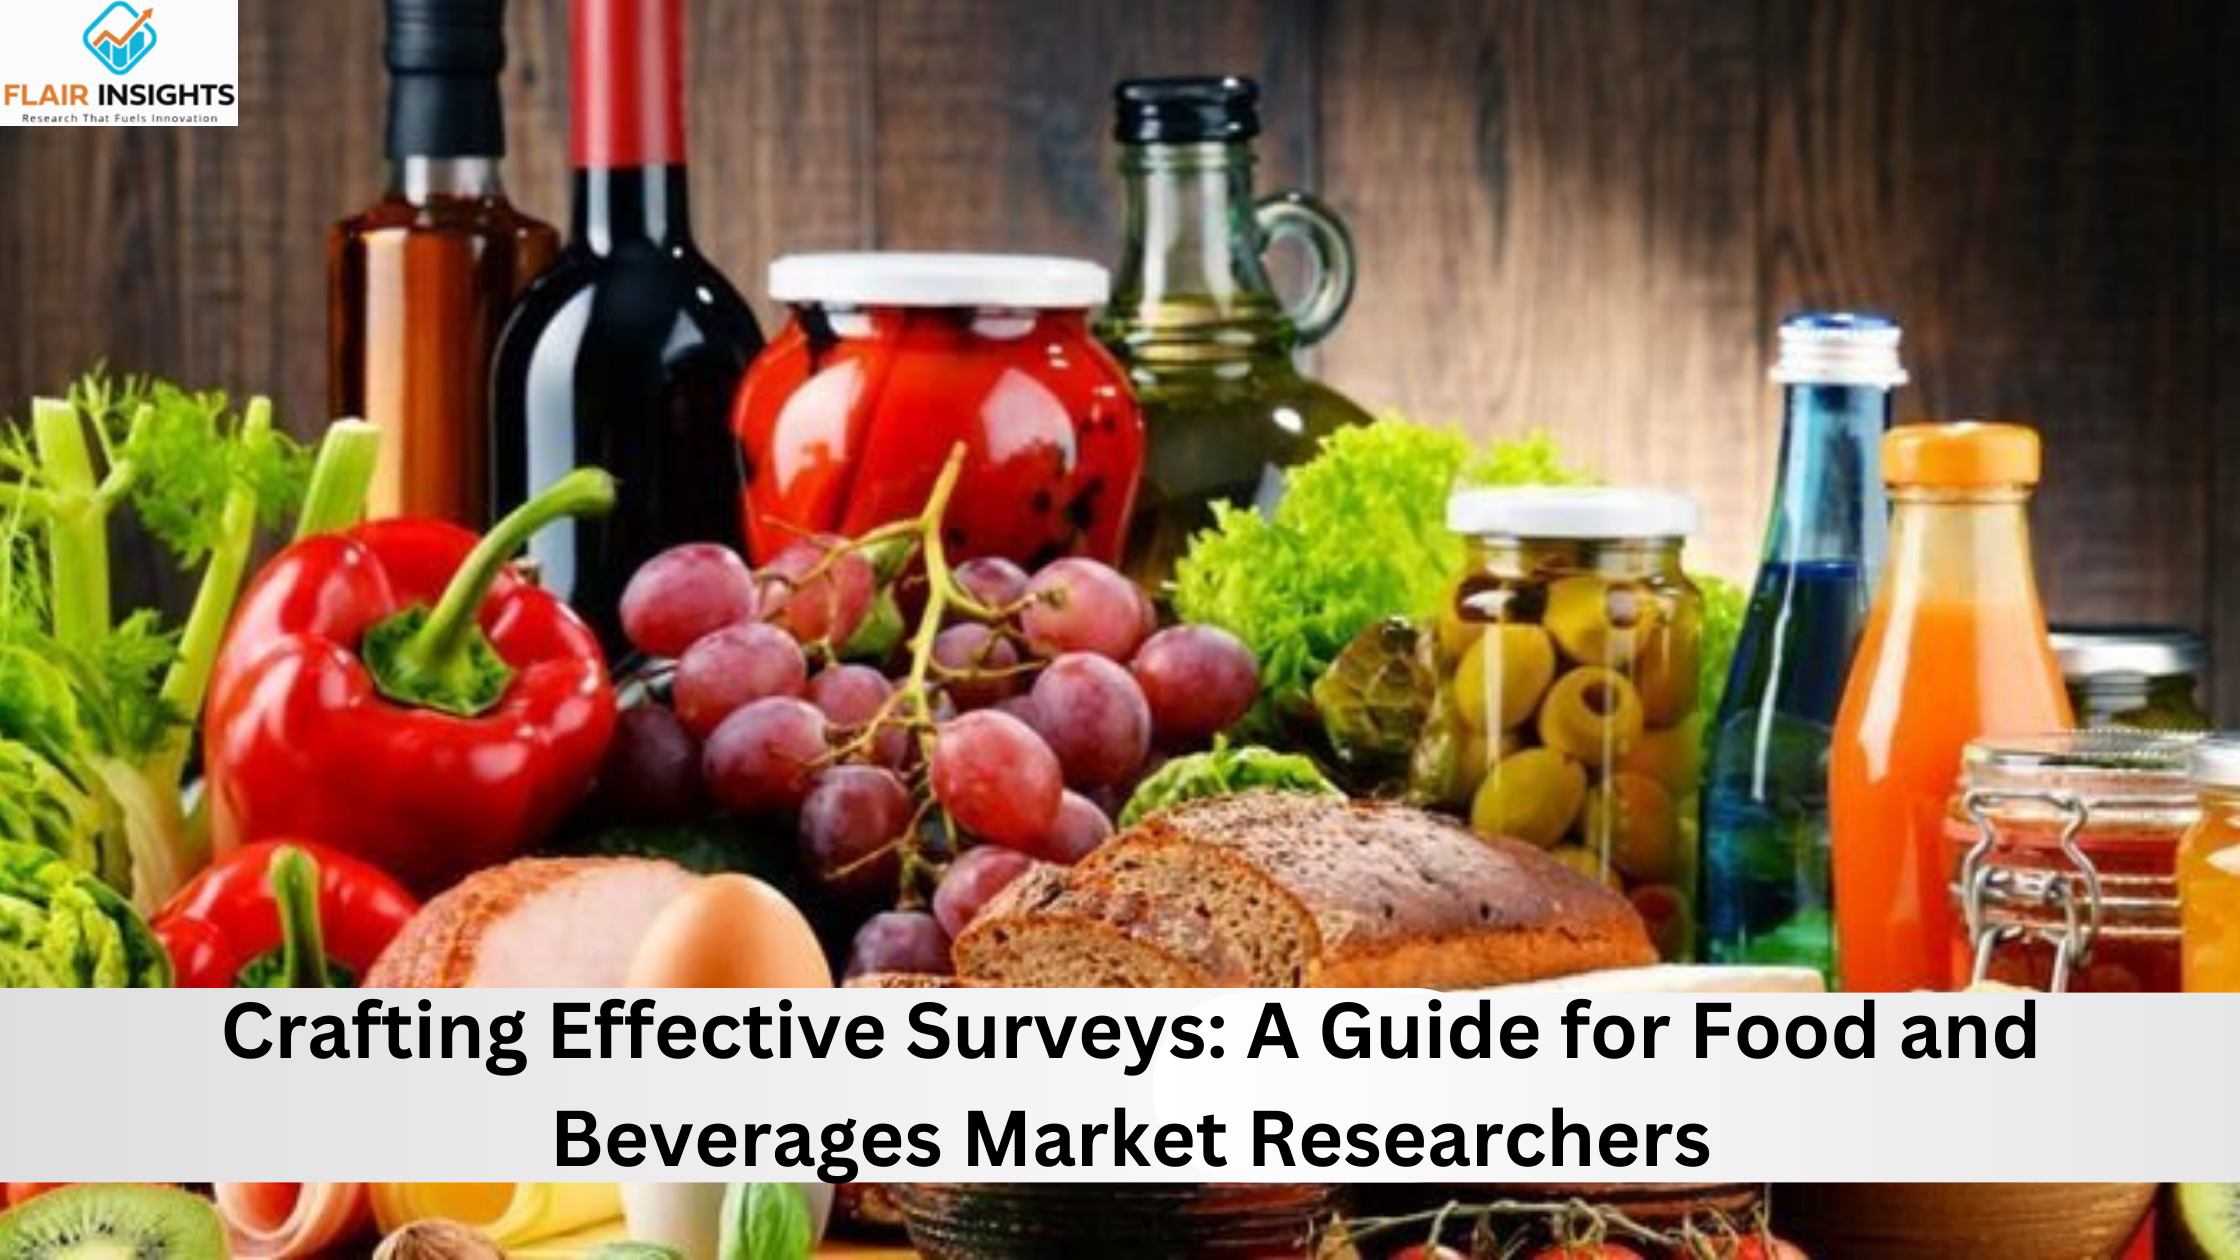 Crafting Effective Surveys: A Guide for Food and Beverages Market Researchers